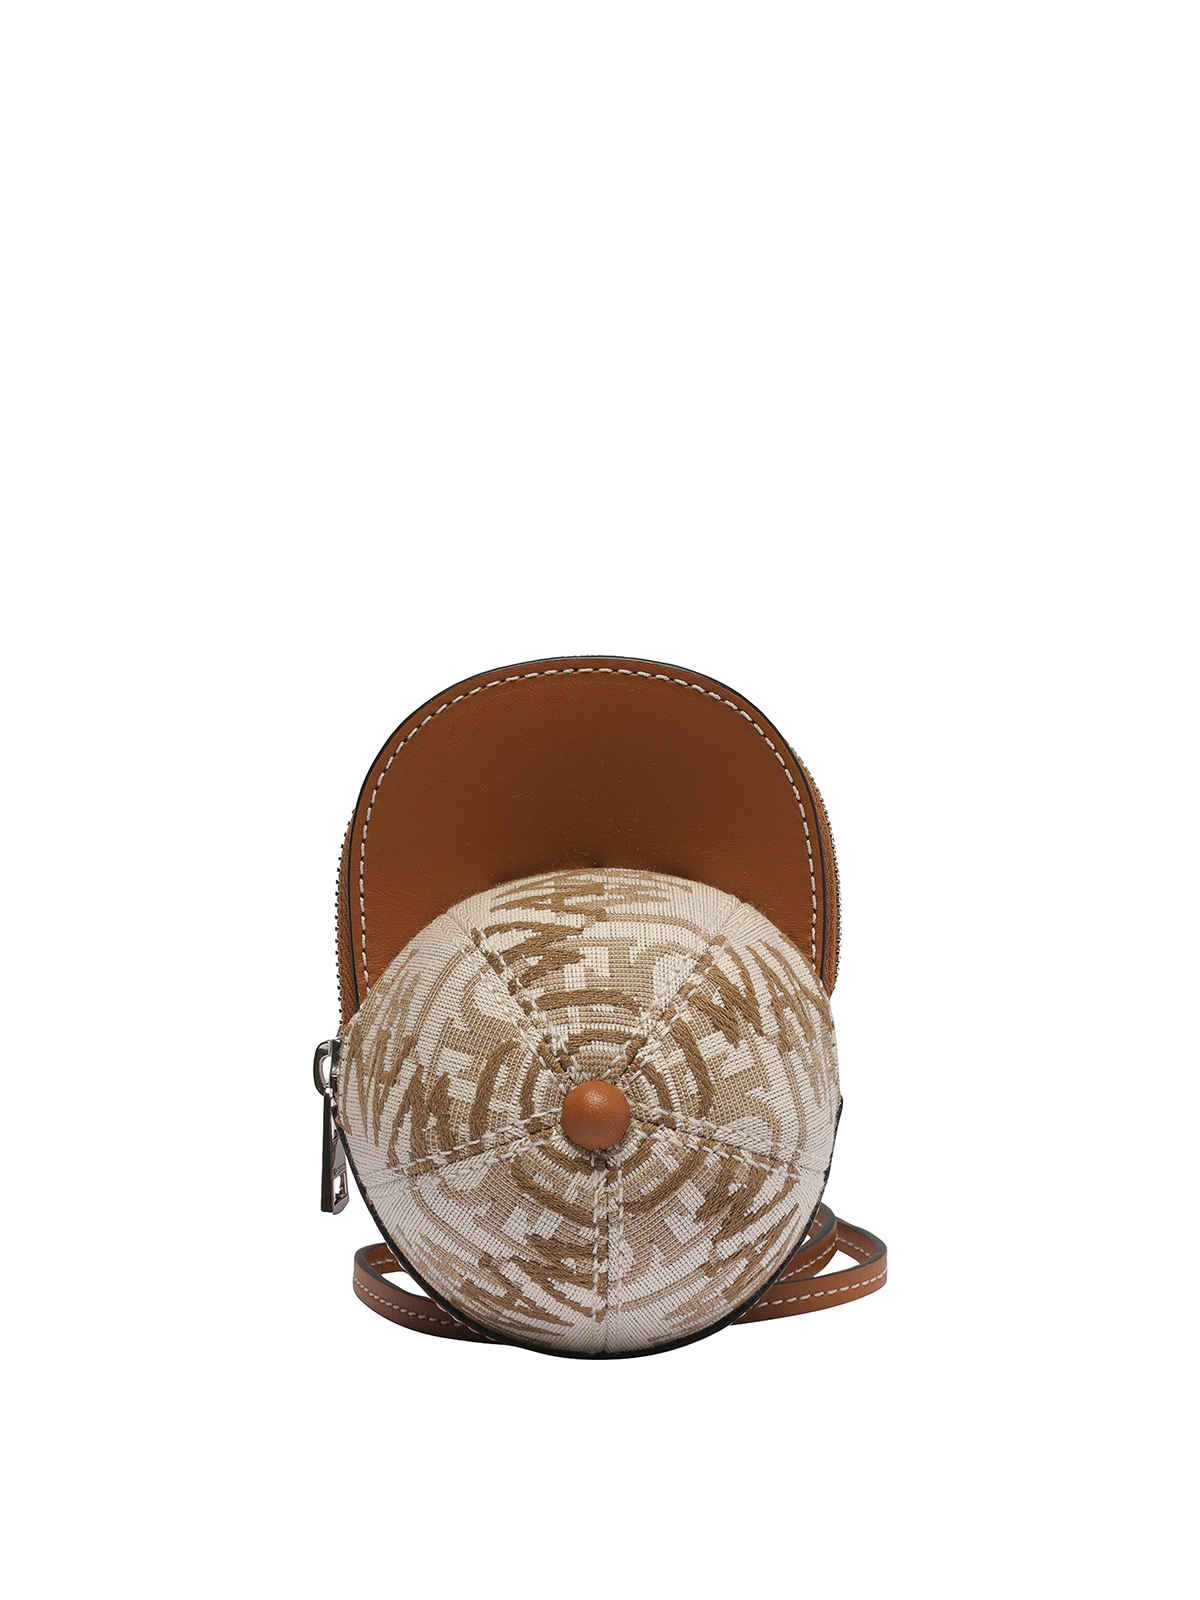 Jw Anderson Leather Shaped Cap Bag With Zip Closure In Brown